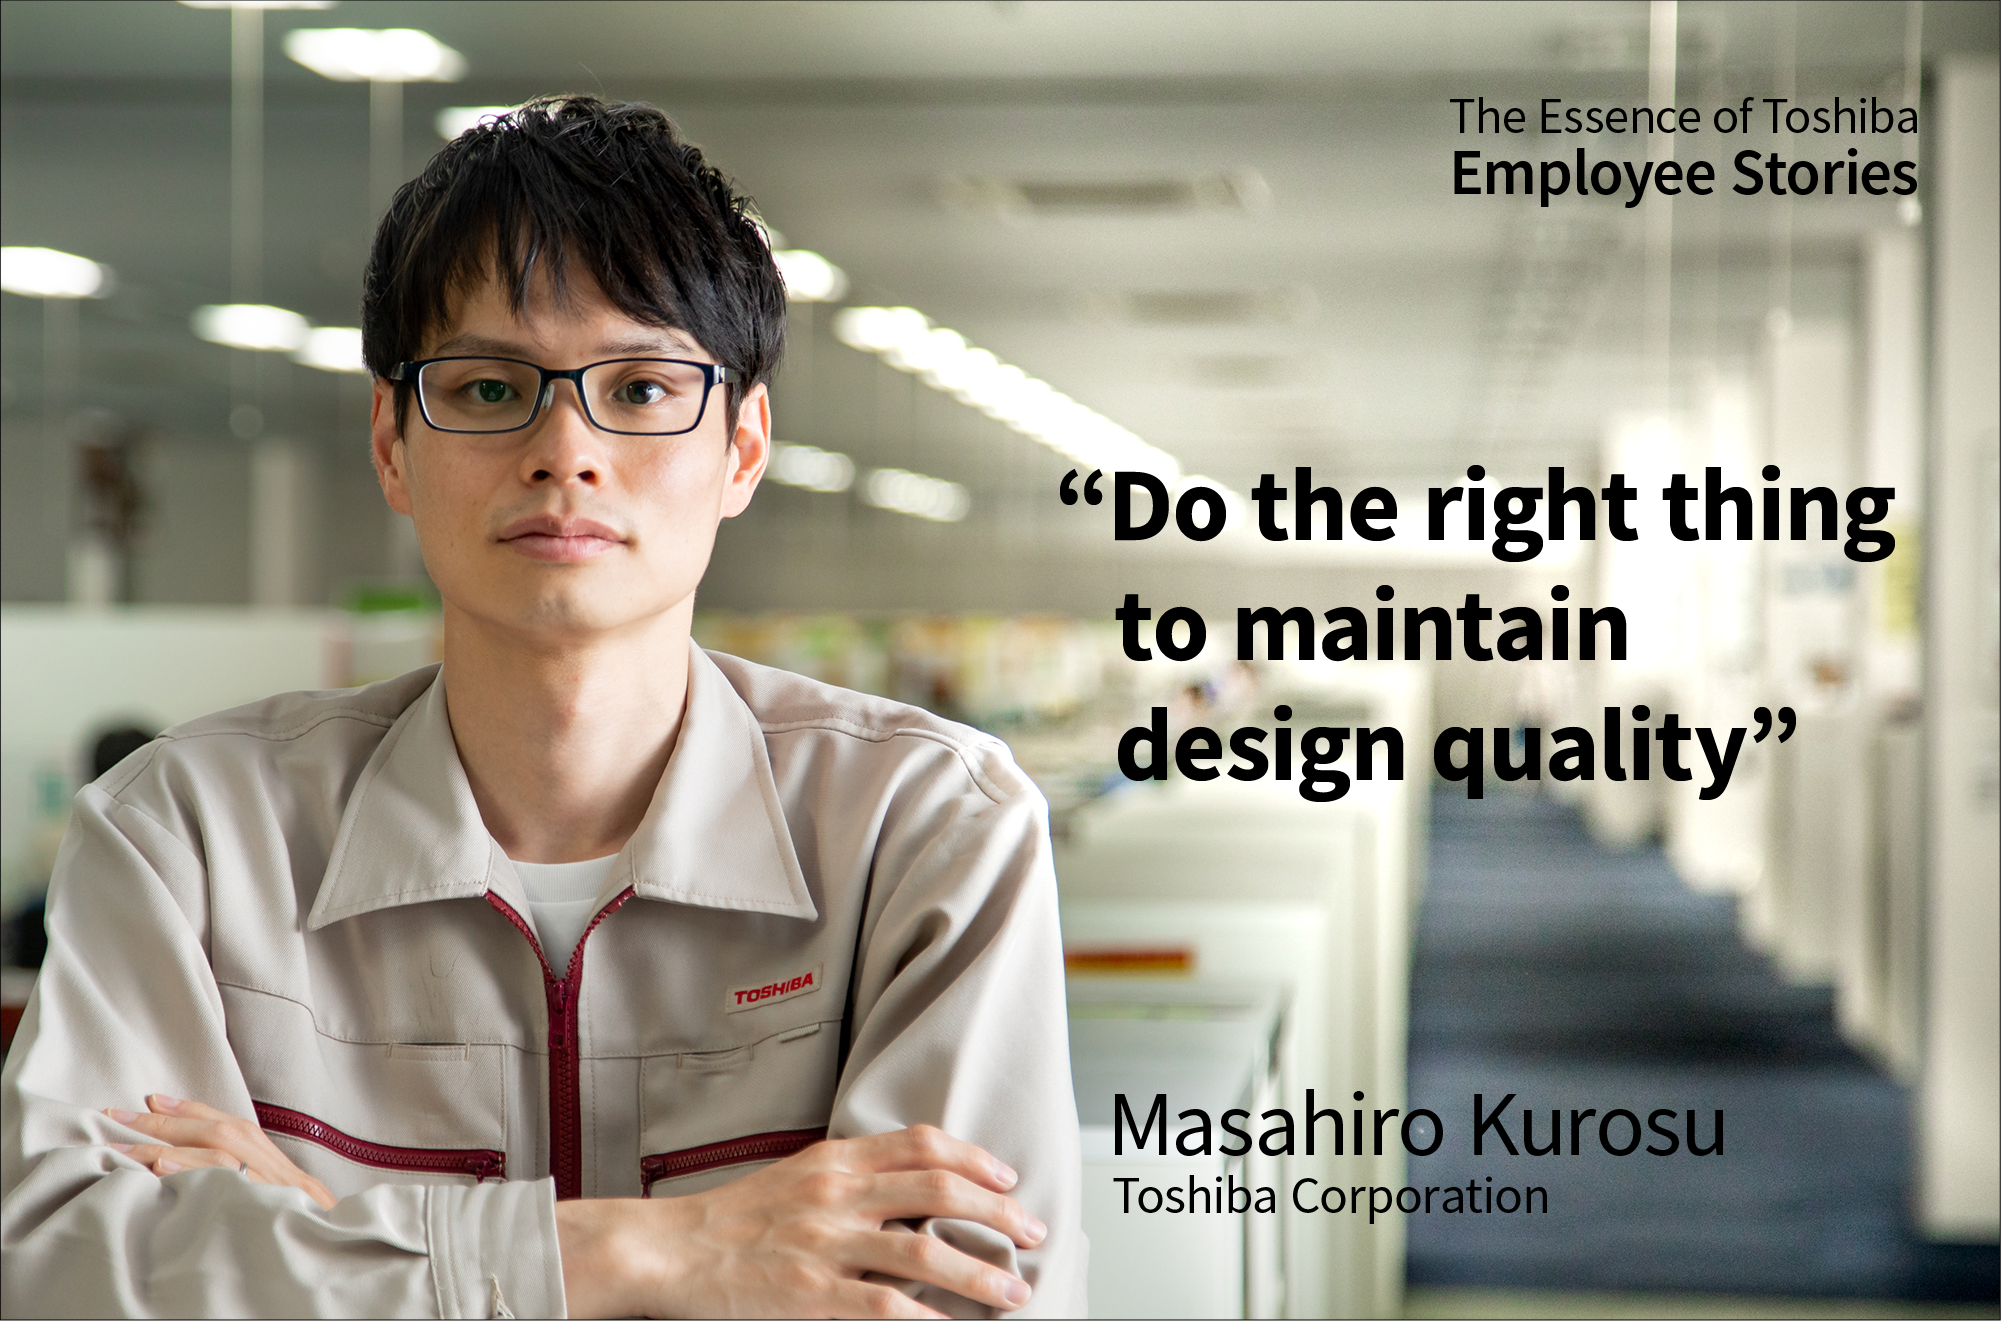 We Are Toshiba: Do the Right Thing as the Last Line of Defense to Maintain Design Quality